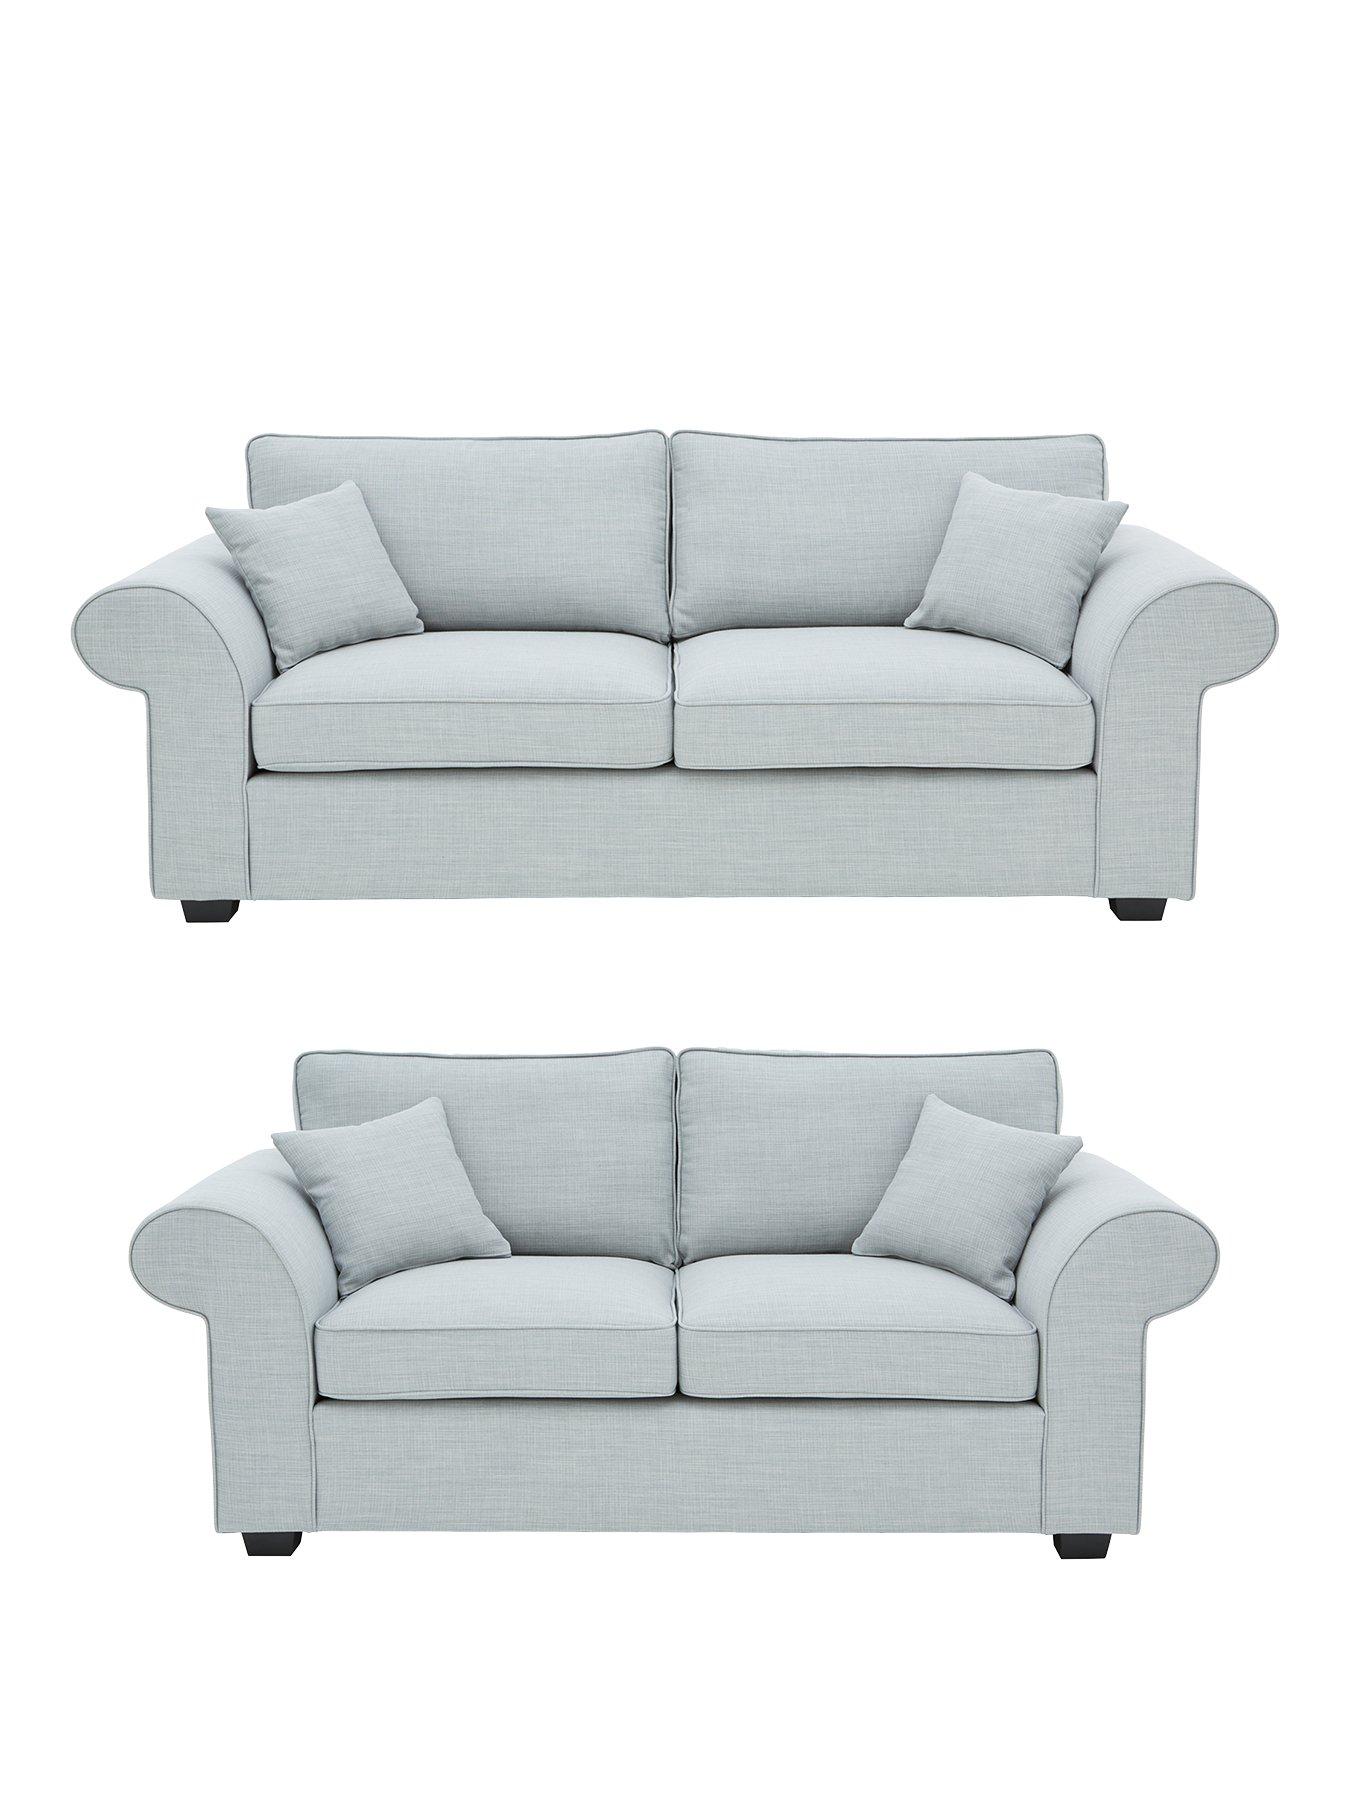 Victoria Fabric 3 Seater 2 Seater Sofa Set Buy And Save